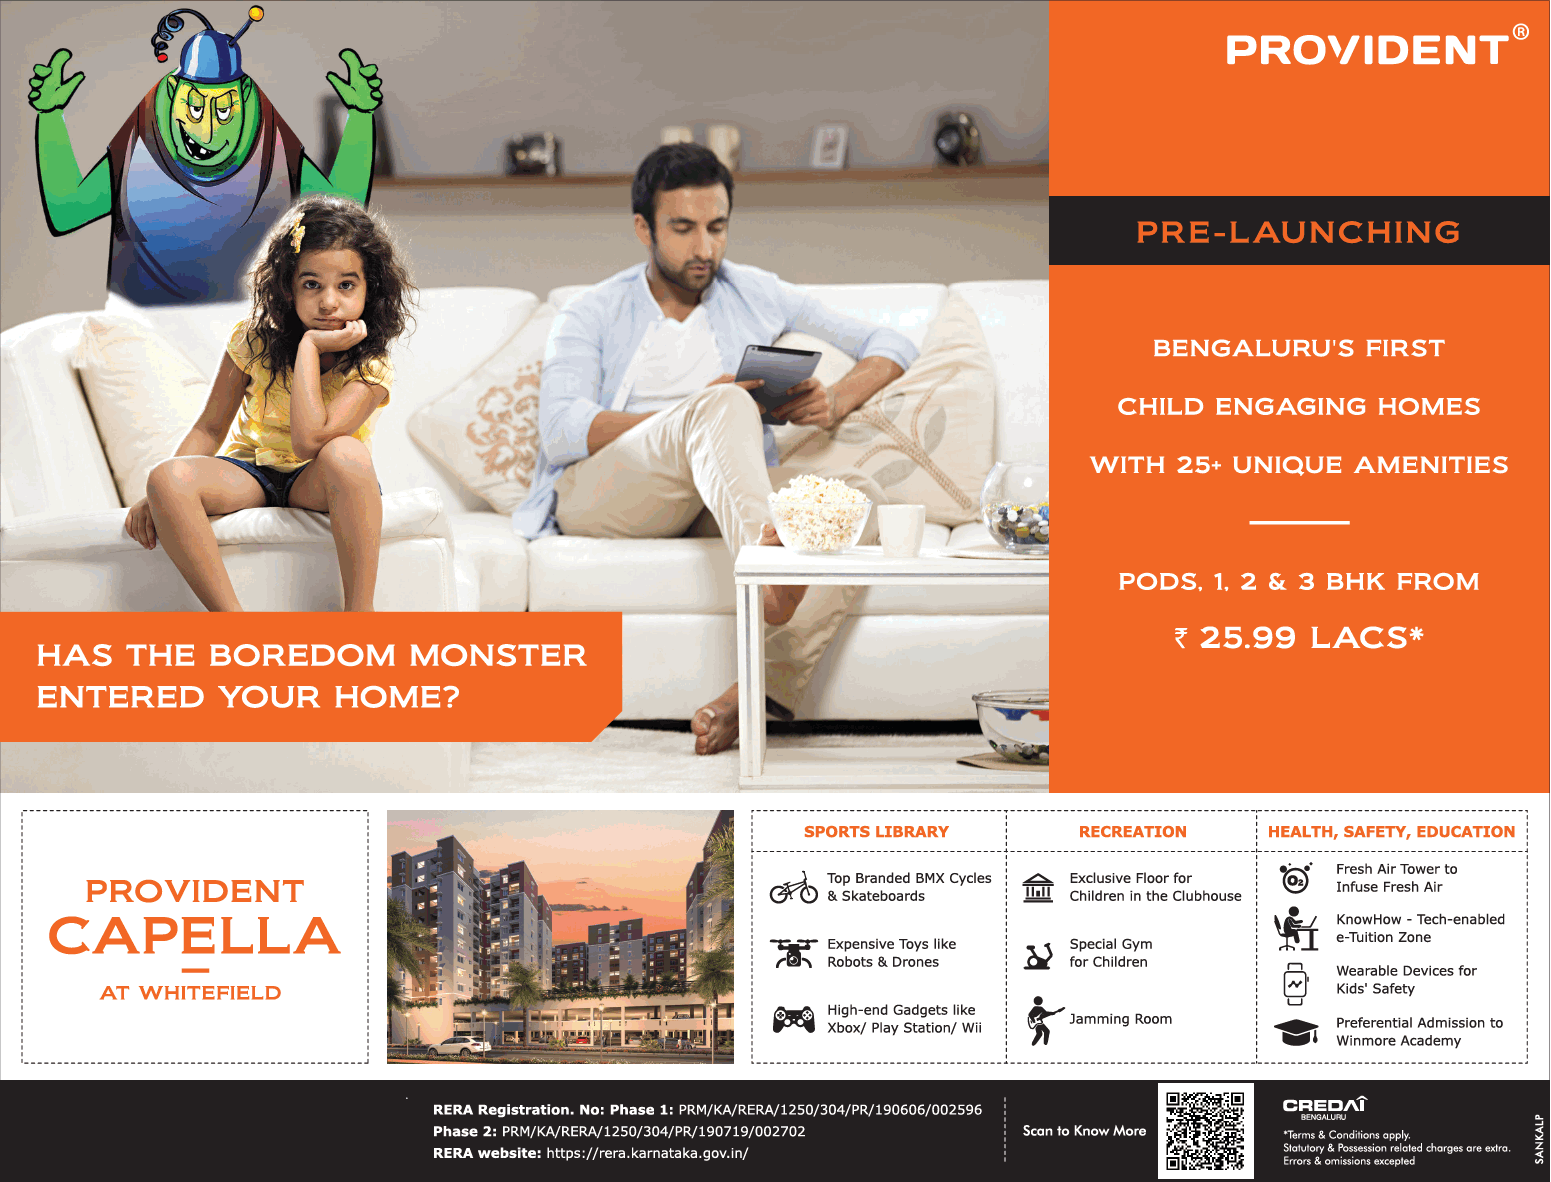 Book Pods, 1, 2 and 3 BHK from Rs 25.99 Lac at Provident Capella in Bangalore Update